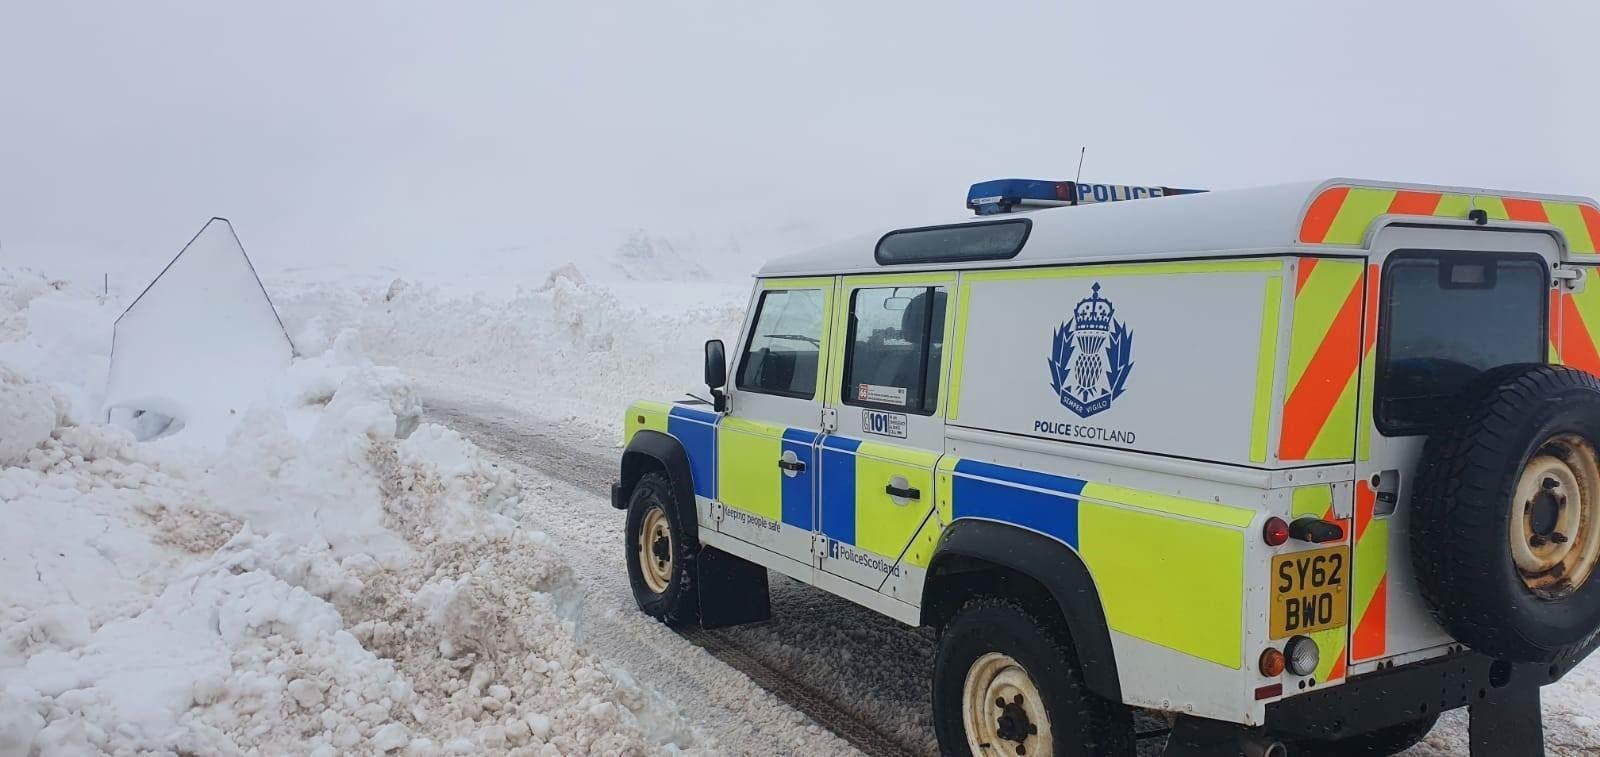 Police assisted with the response to the blocked road which saw 22 vehicles trapped overnight. Picture: Police Scotland